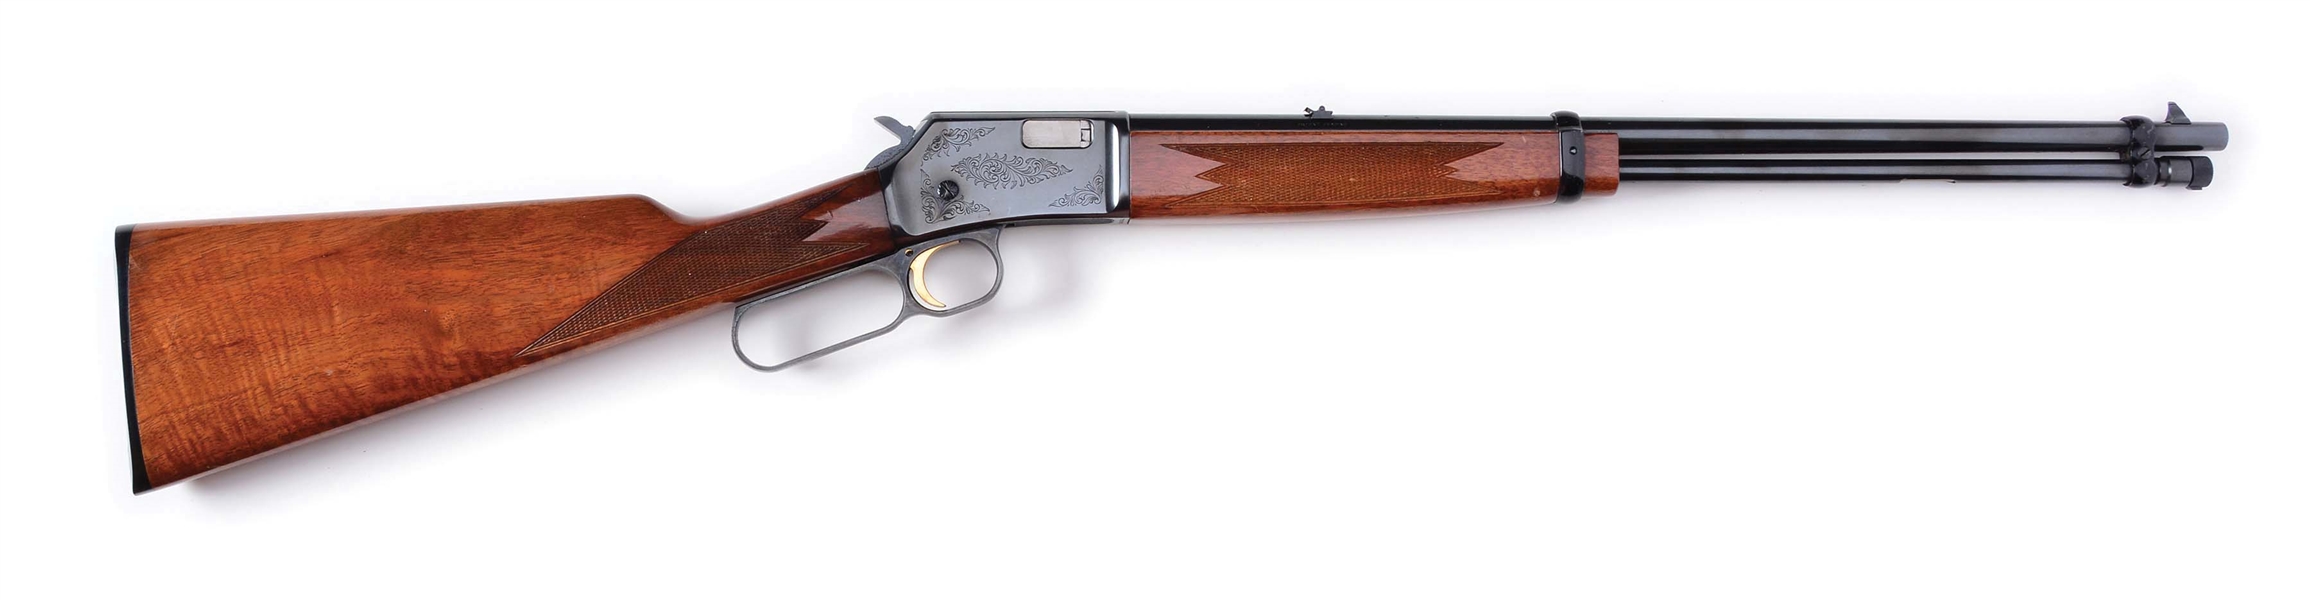 (M) ENGRAVED BROWNING LEVER ACTION RIFLE.